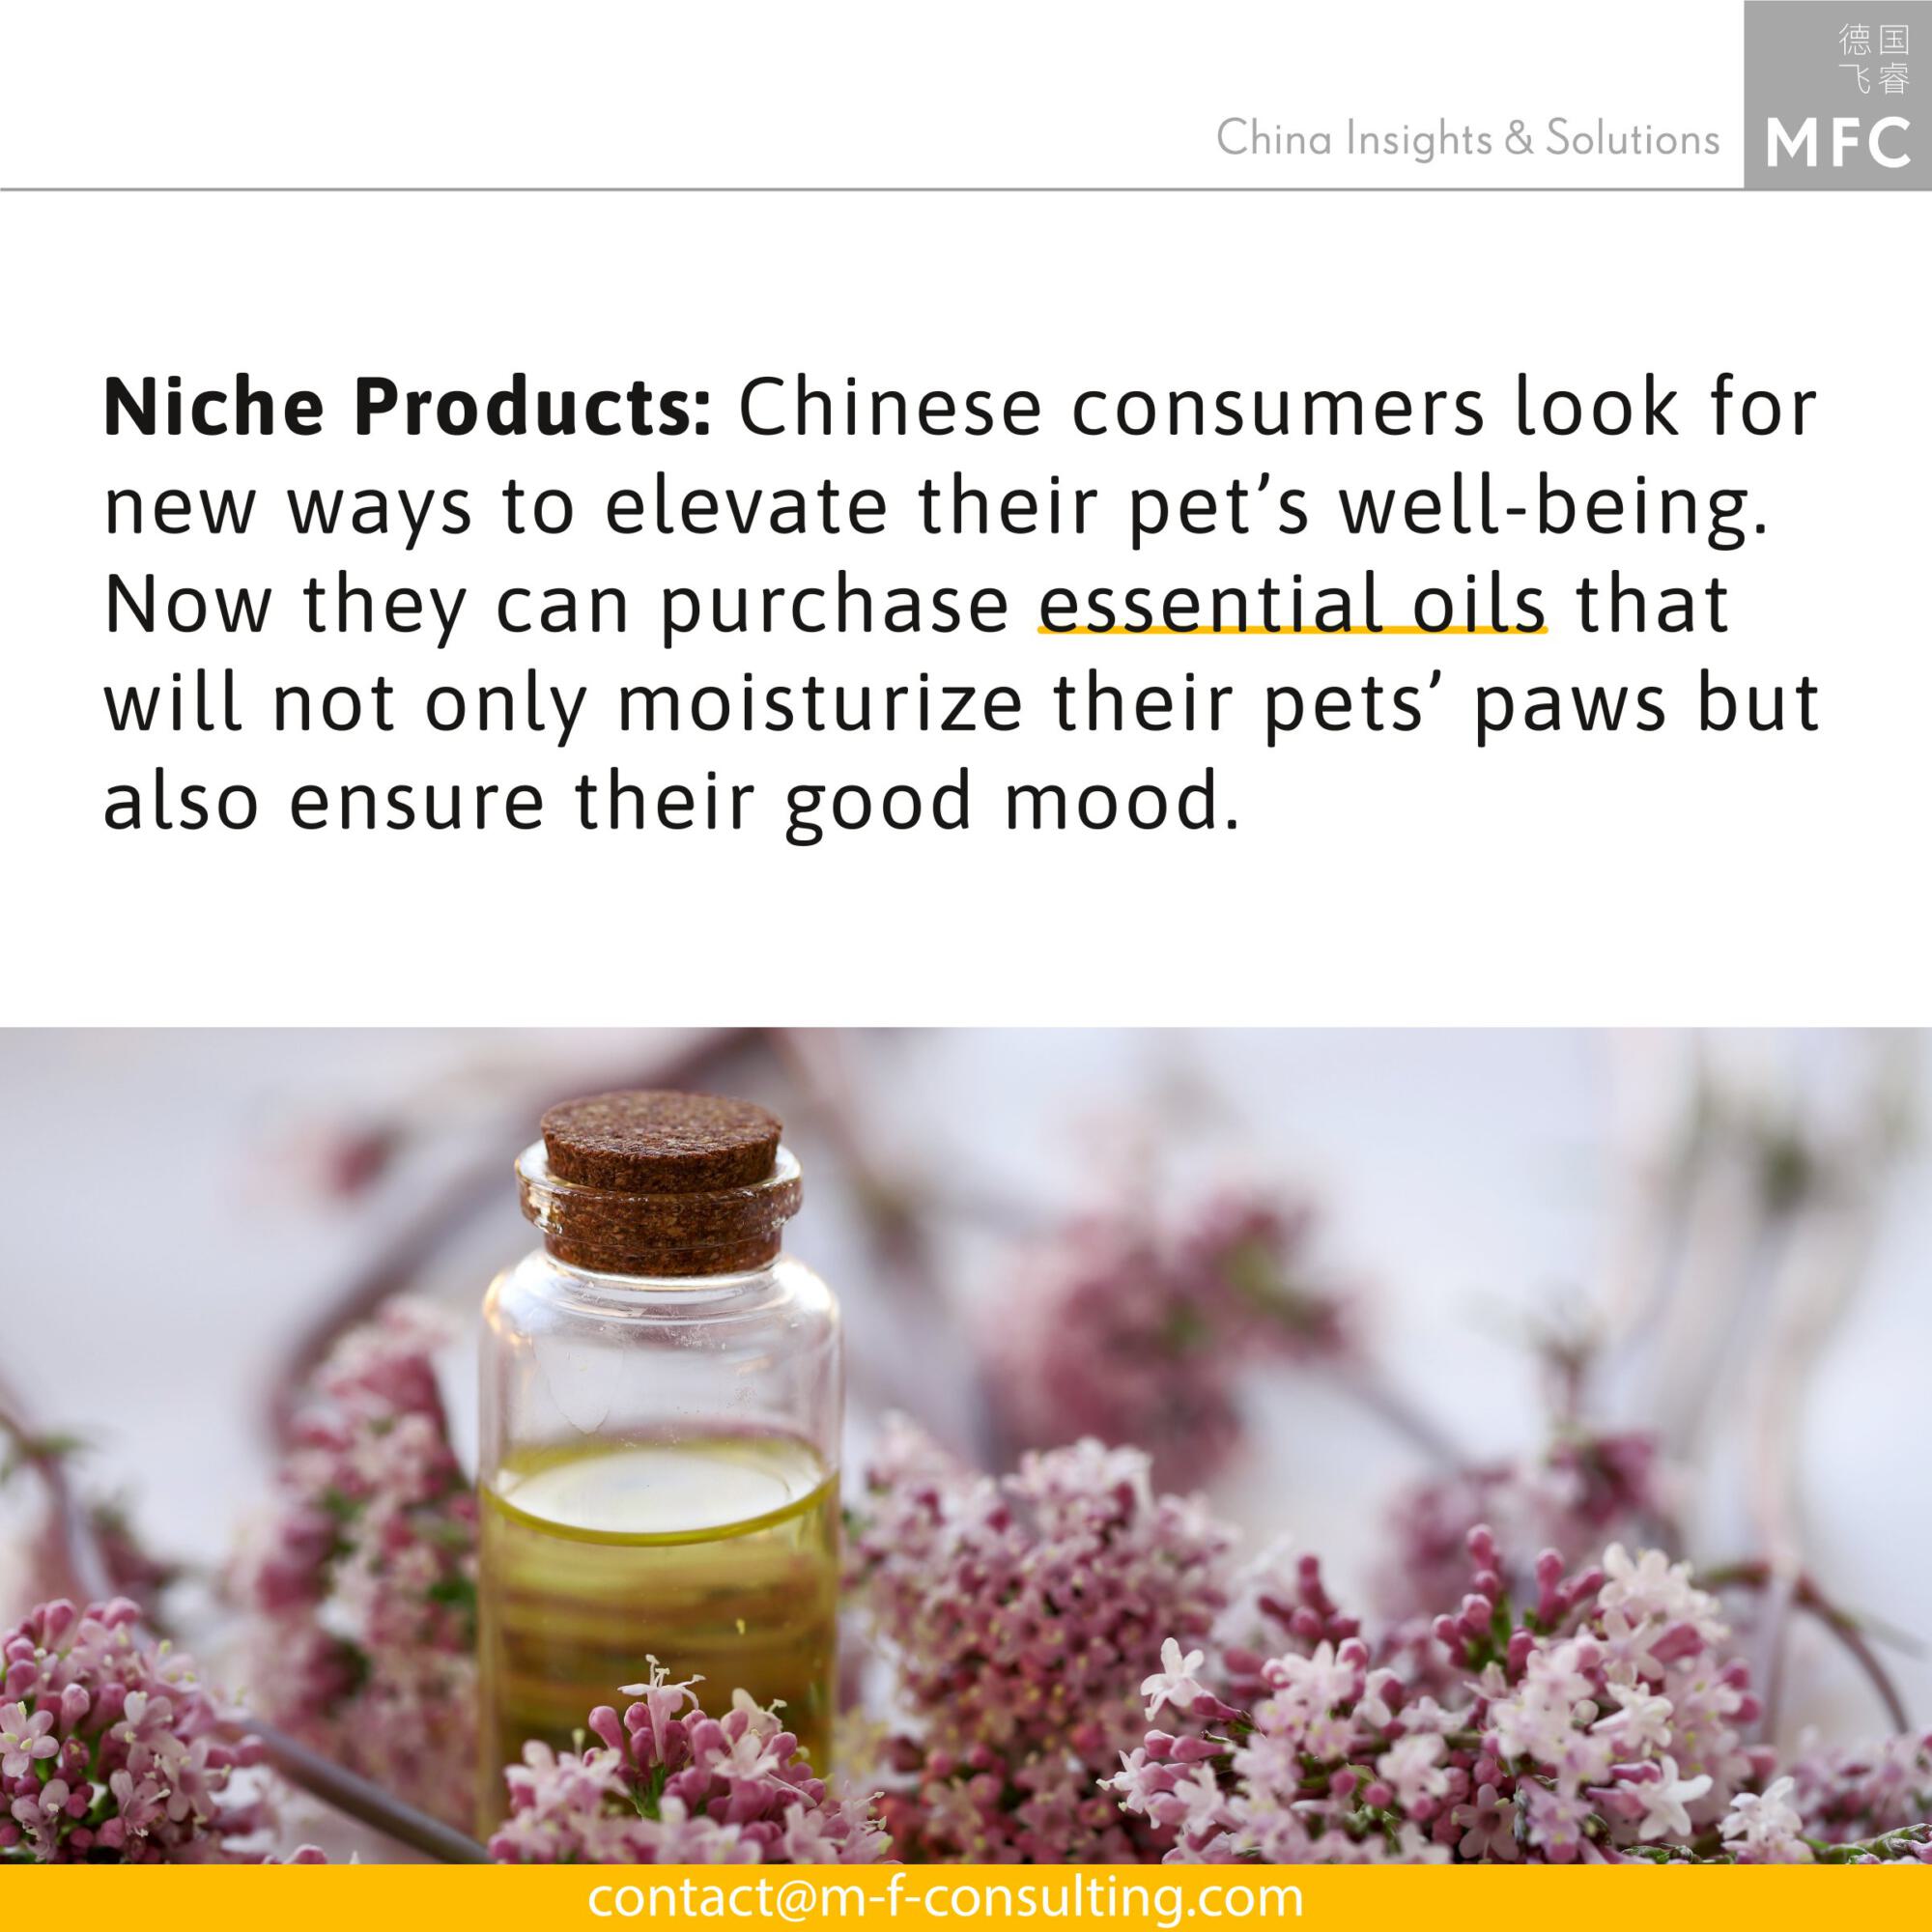 China's Pet Industry: Niche products - Chinese consumers look for new ways to elevate their pet's well-being. Now they can purchase essential oils that will not only moisturize their pets' paws but also ensure their good mood.